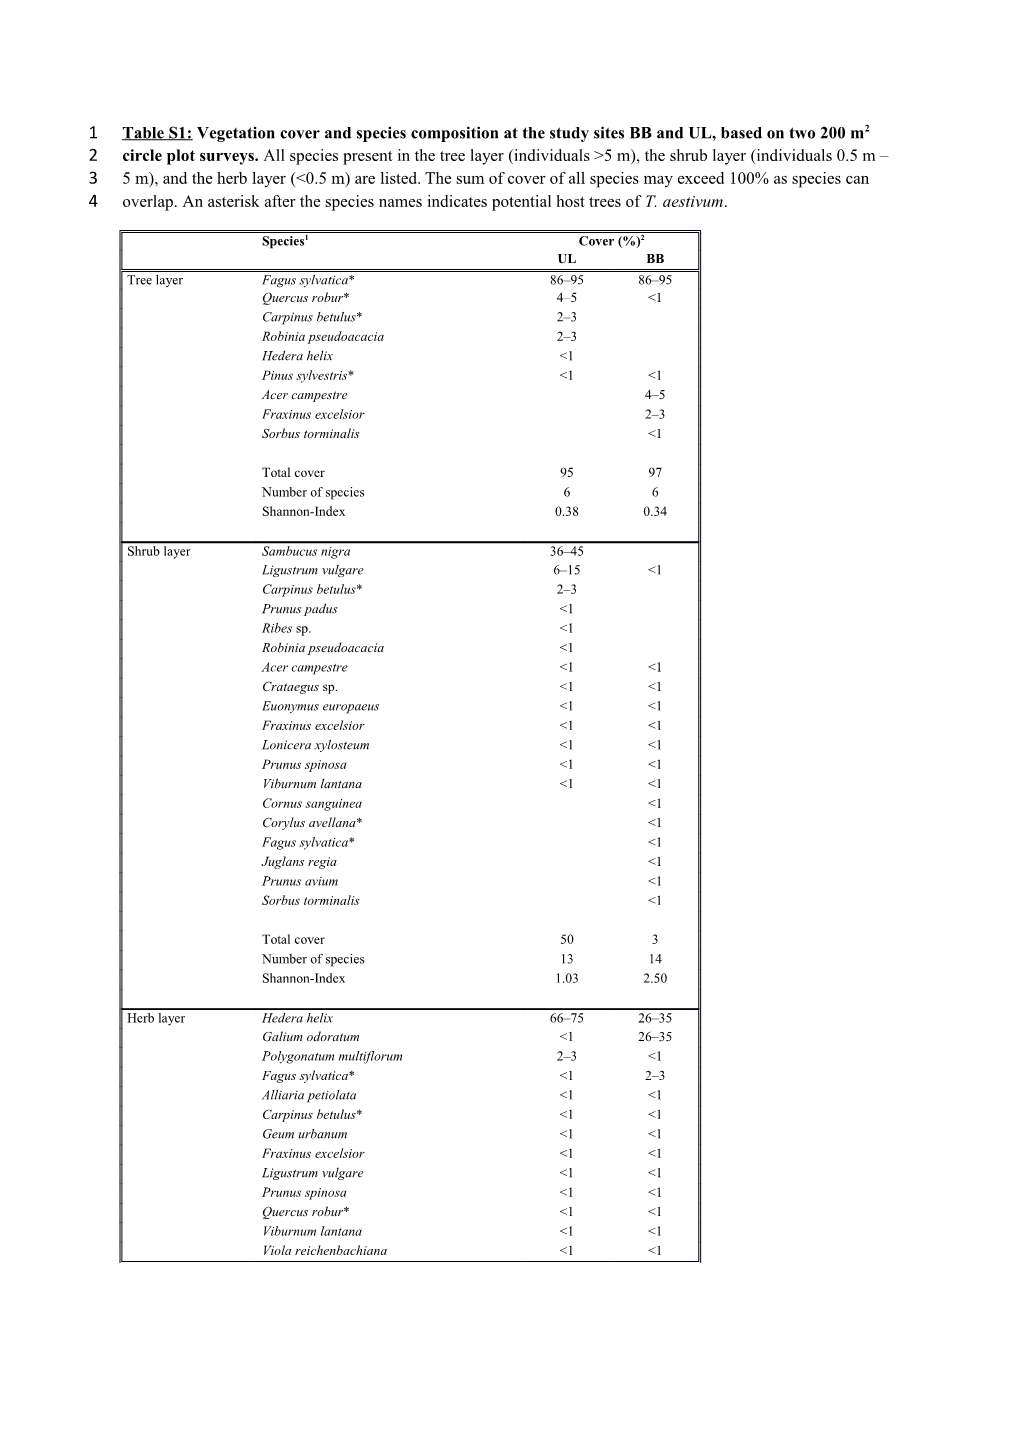 Table S2:Weight, Maturity, Multi-Loci Genotype (MLG) and Genetic Group Membership For